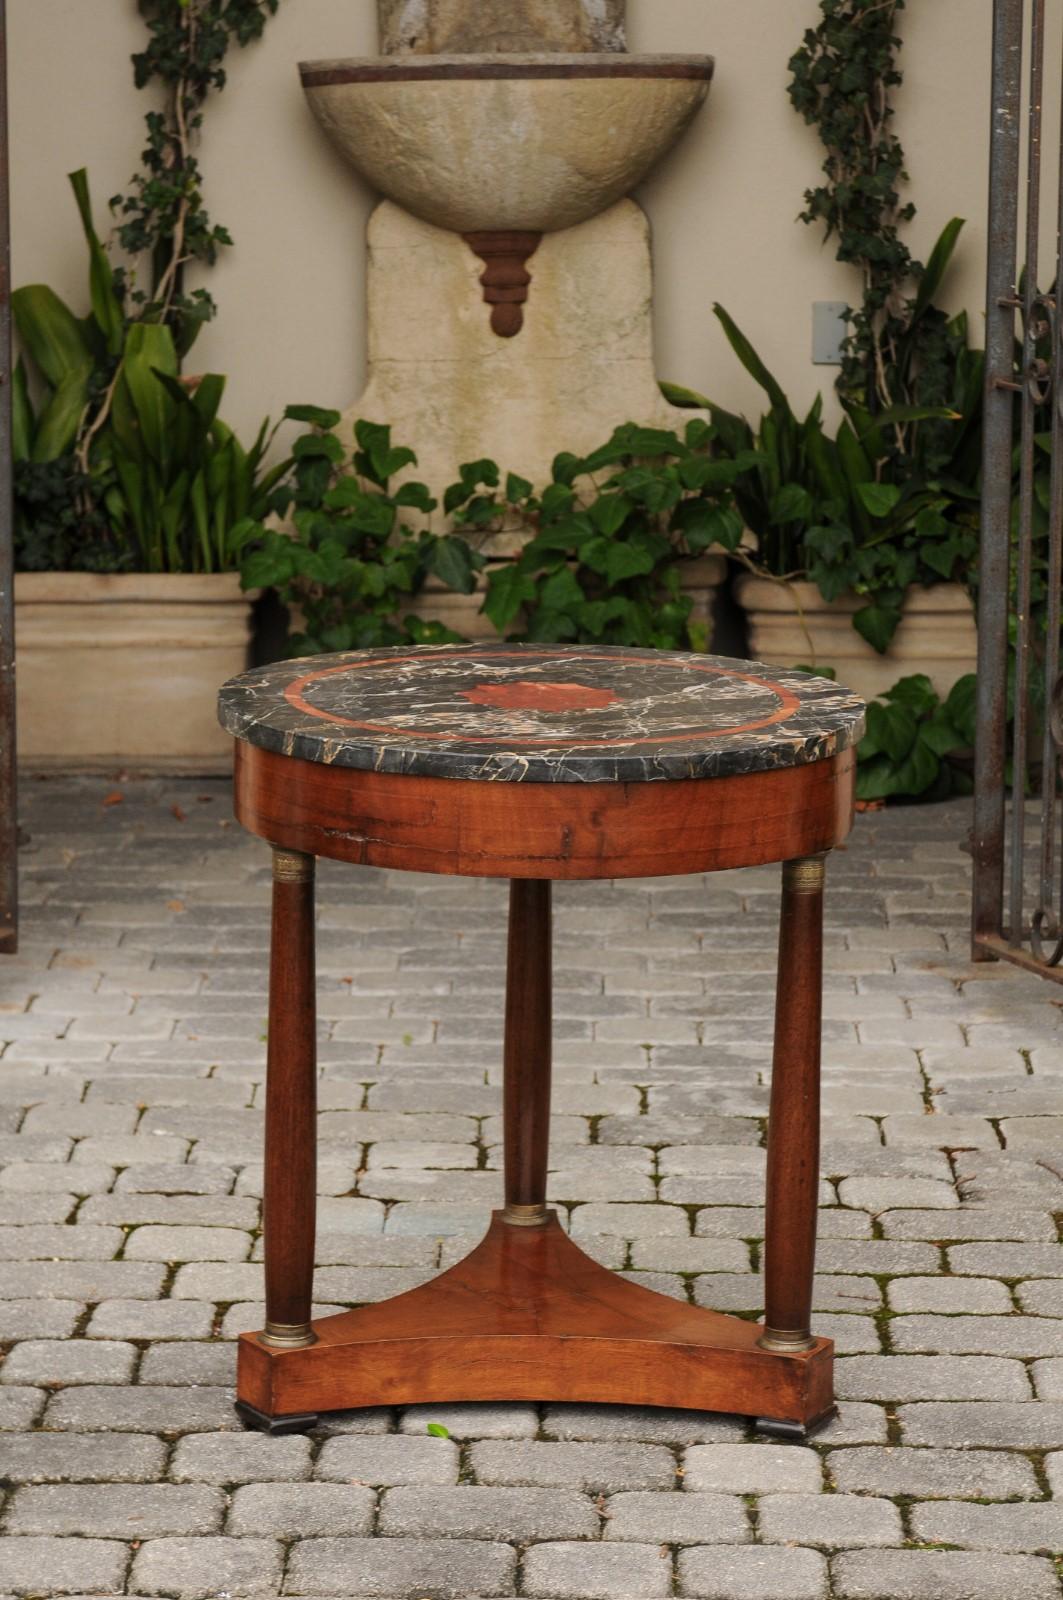 A French Napoleon III period walnut table from the third quarter of the 19th century, with variegated grey and red marble top, entasis columns and bronze capitals. Born in France at the end of emperor Napoleon III's reign, this exquisite table